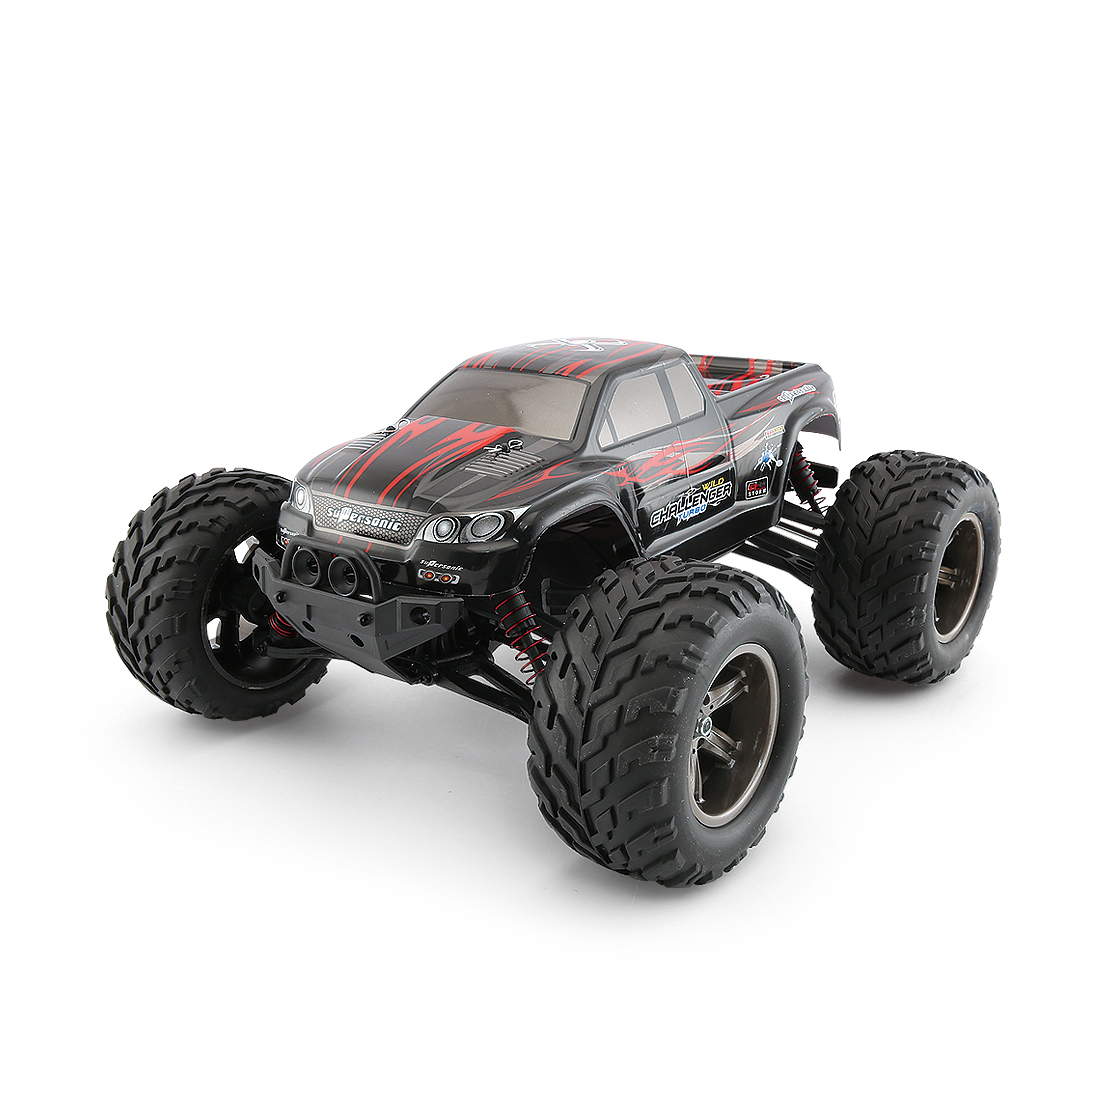 Singda Nuovo arrivo 1:12 2.4 Ghz 2WD Full Proportional Monster High speed Truck SD9115